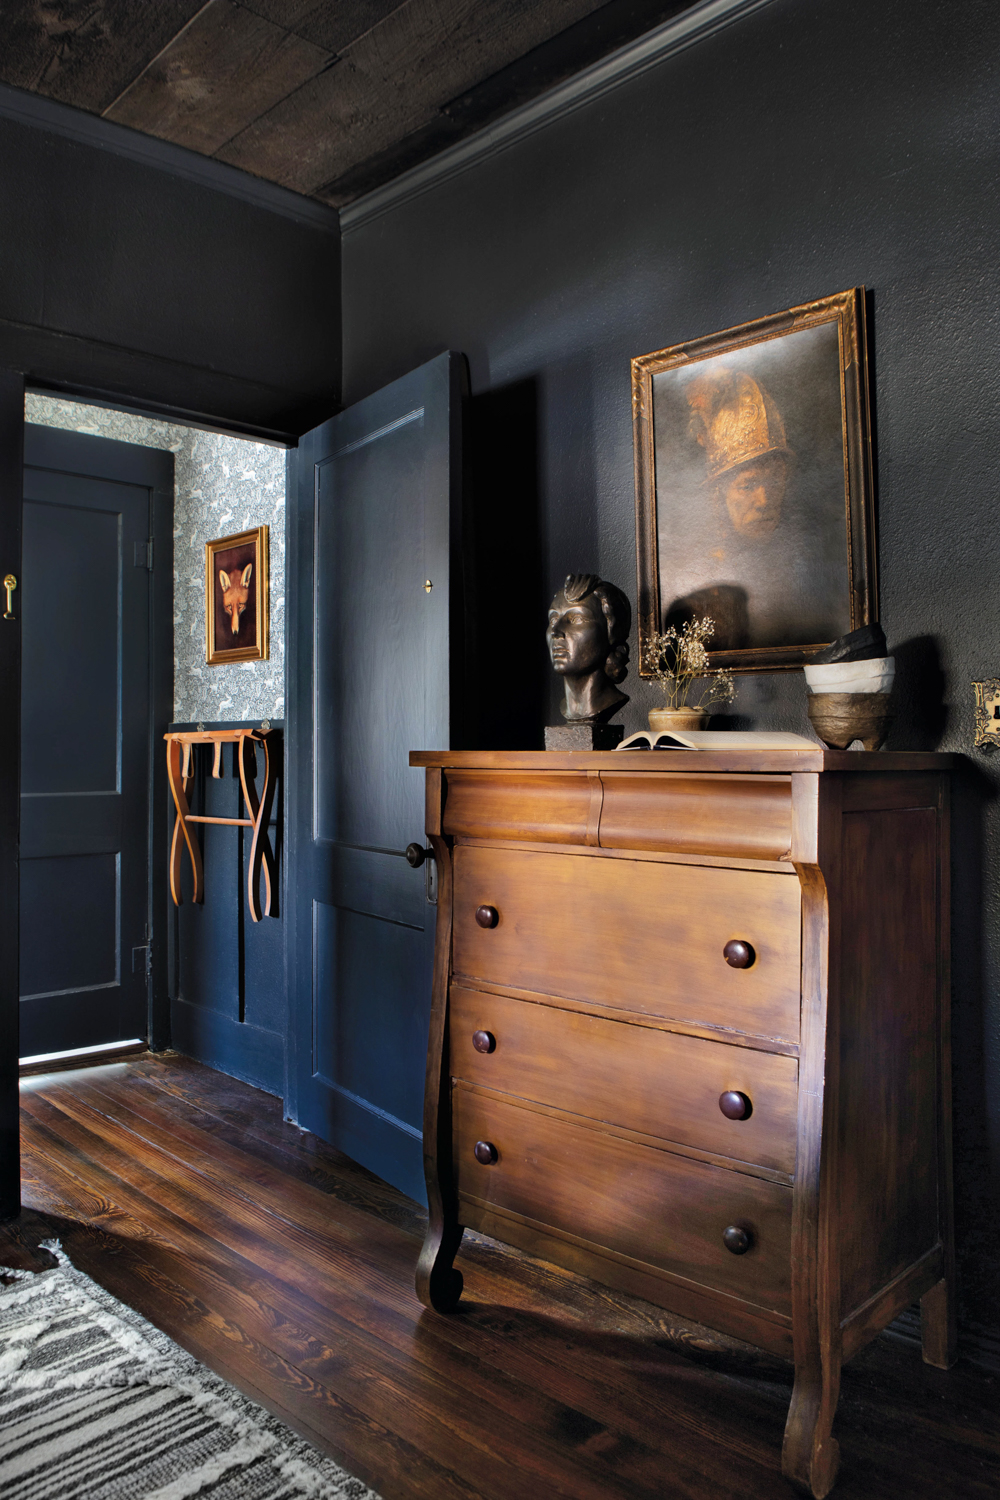 Room with painting, and a 3-drawer wooden dresser standing against midnight-blue walls and an open door